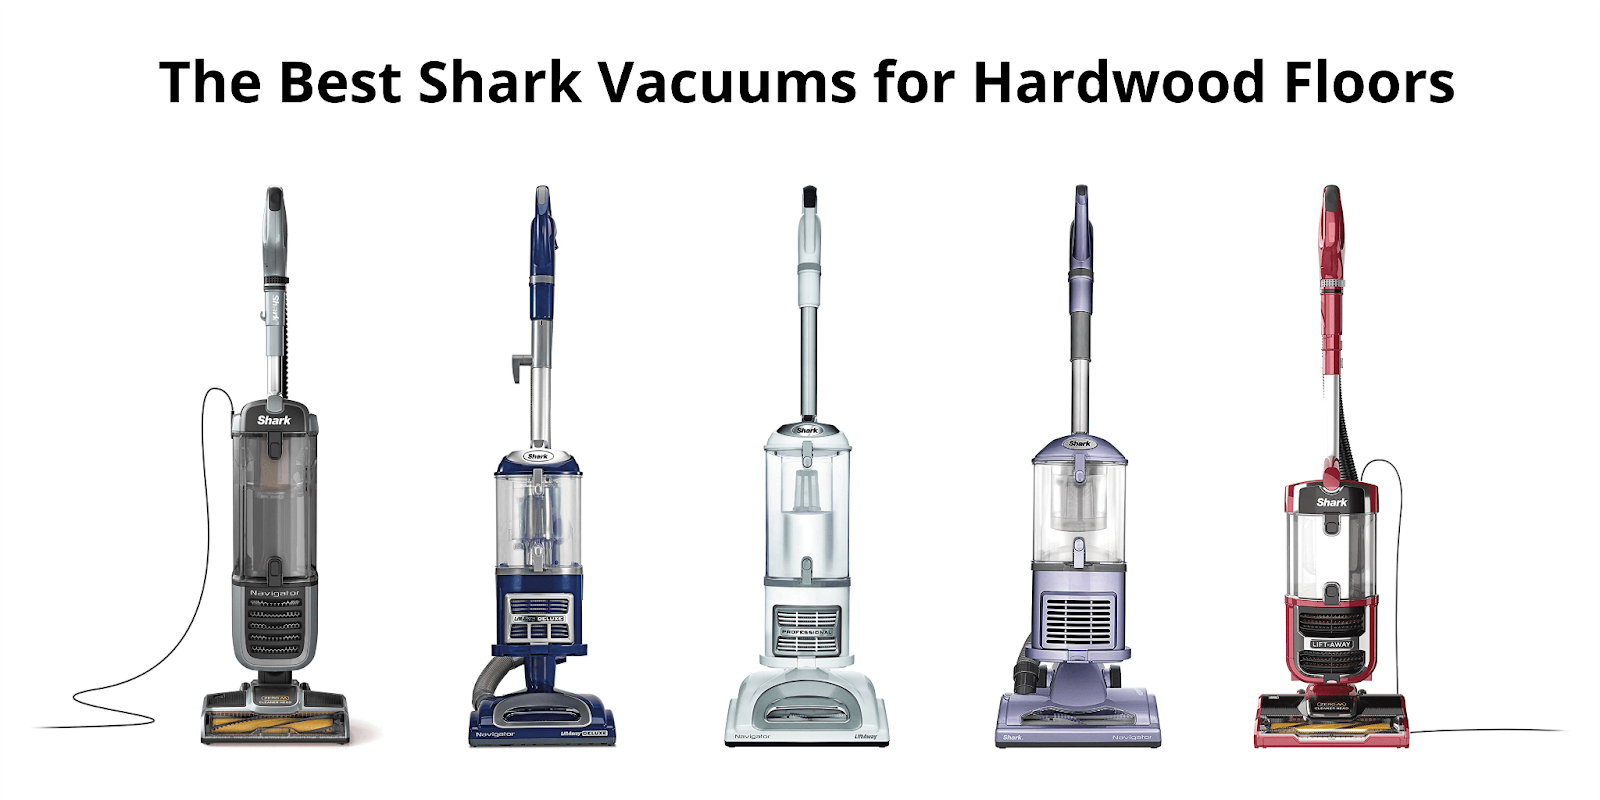 The ultimate list of Shark vacuums for hardwood floors with updated all the new features.